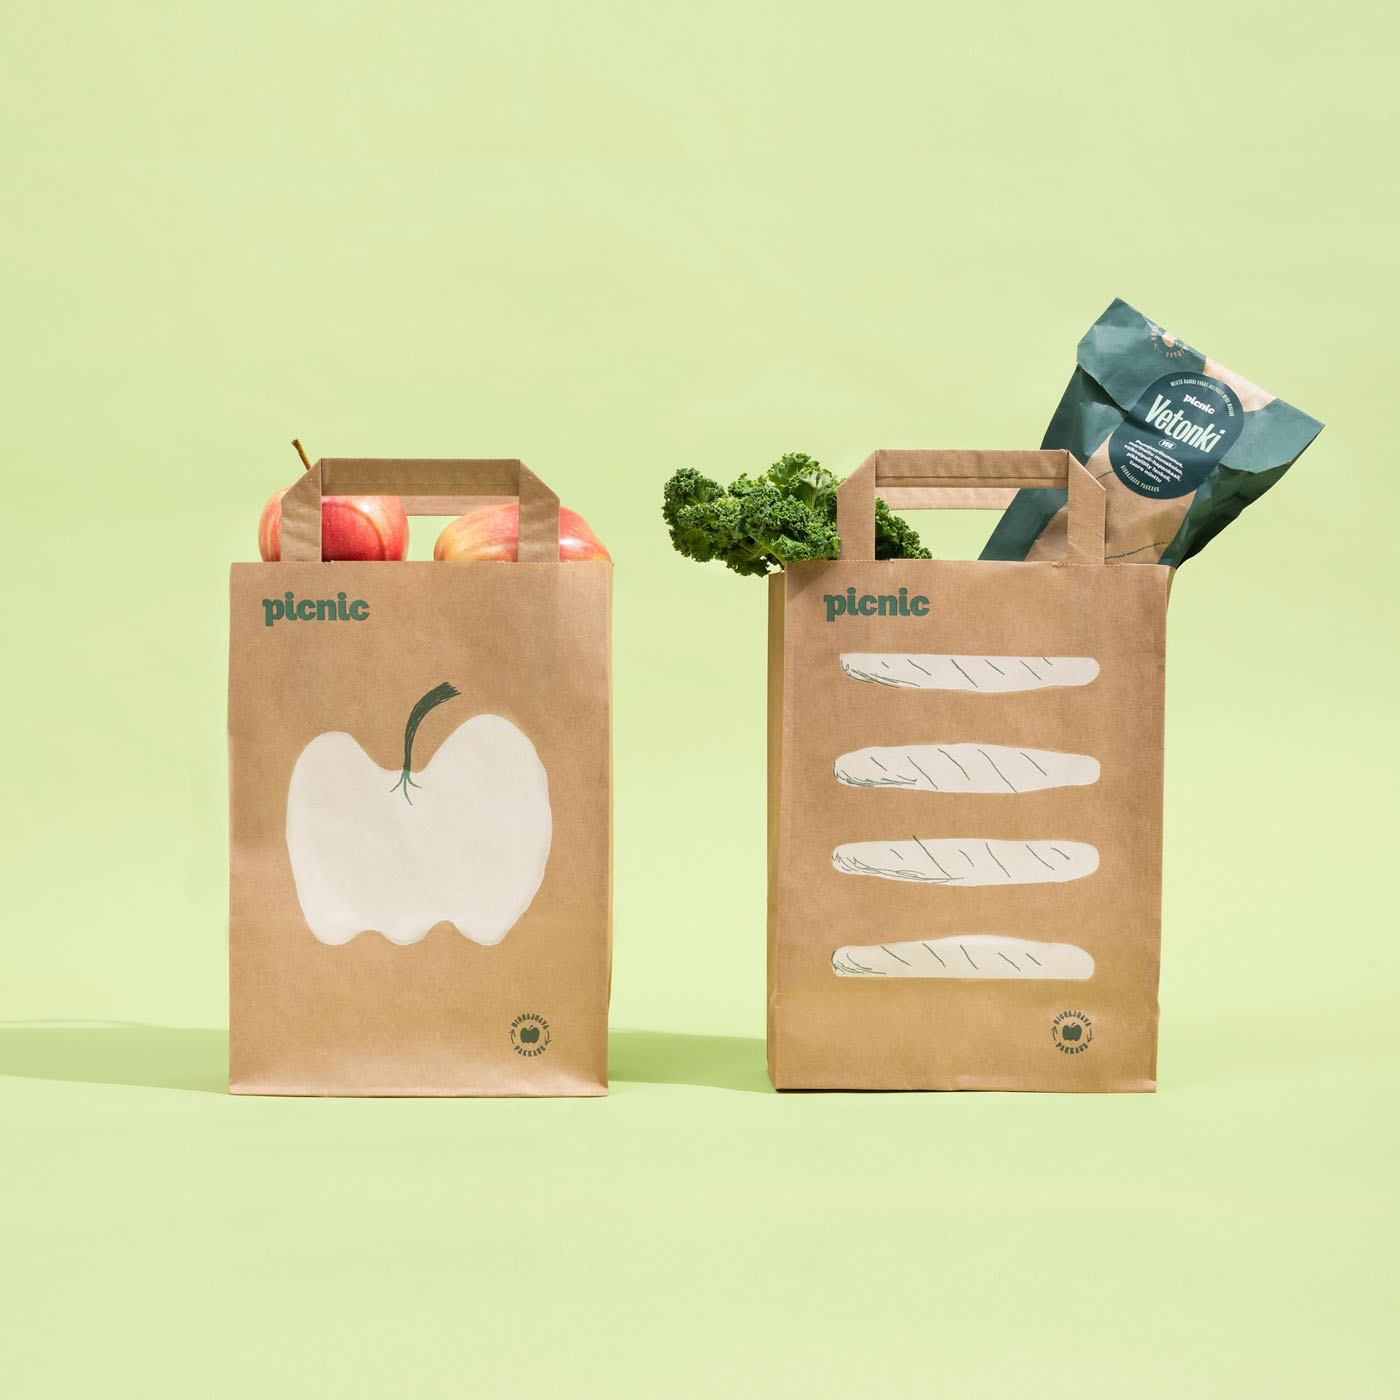 two paper bags filled with groceries on a light green background by Tomas Olsen